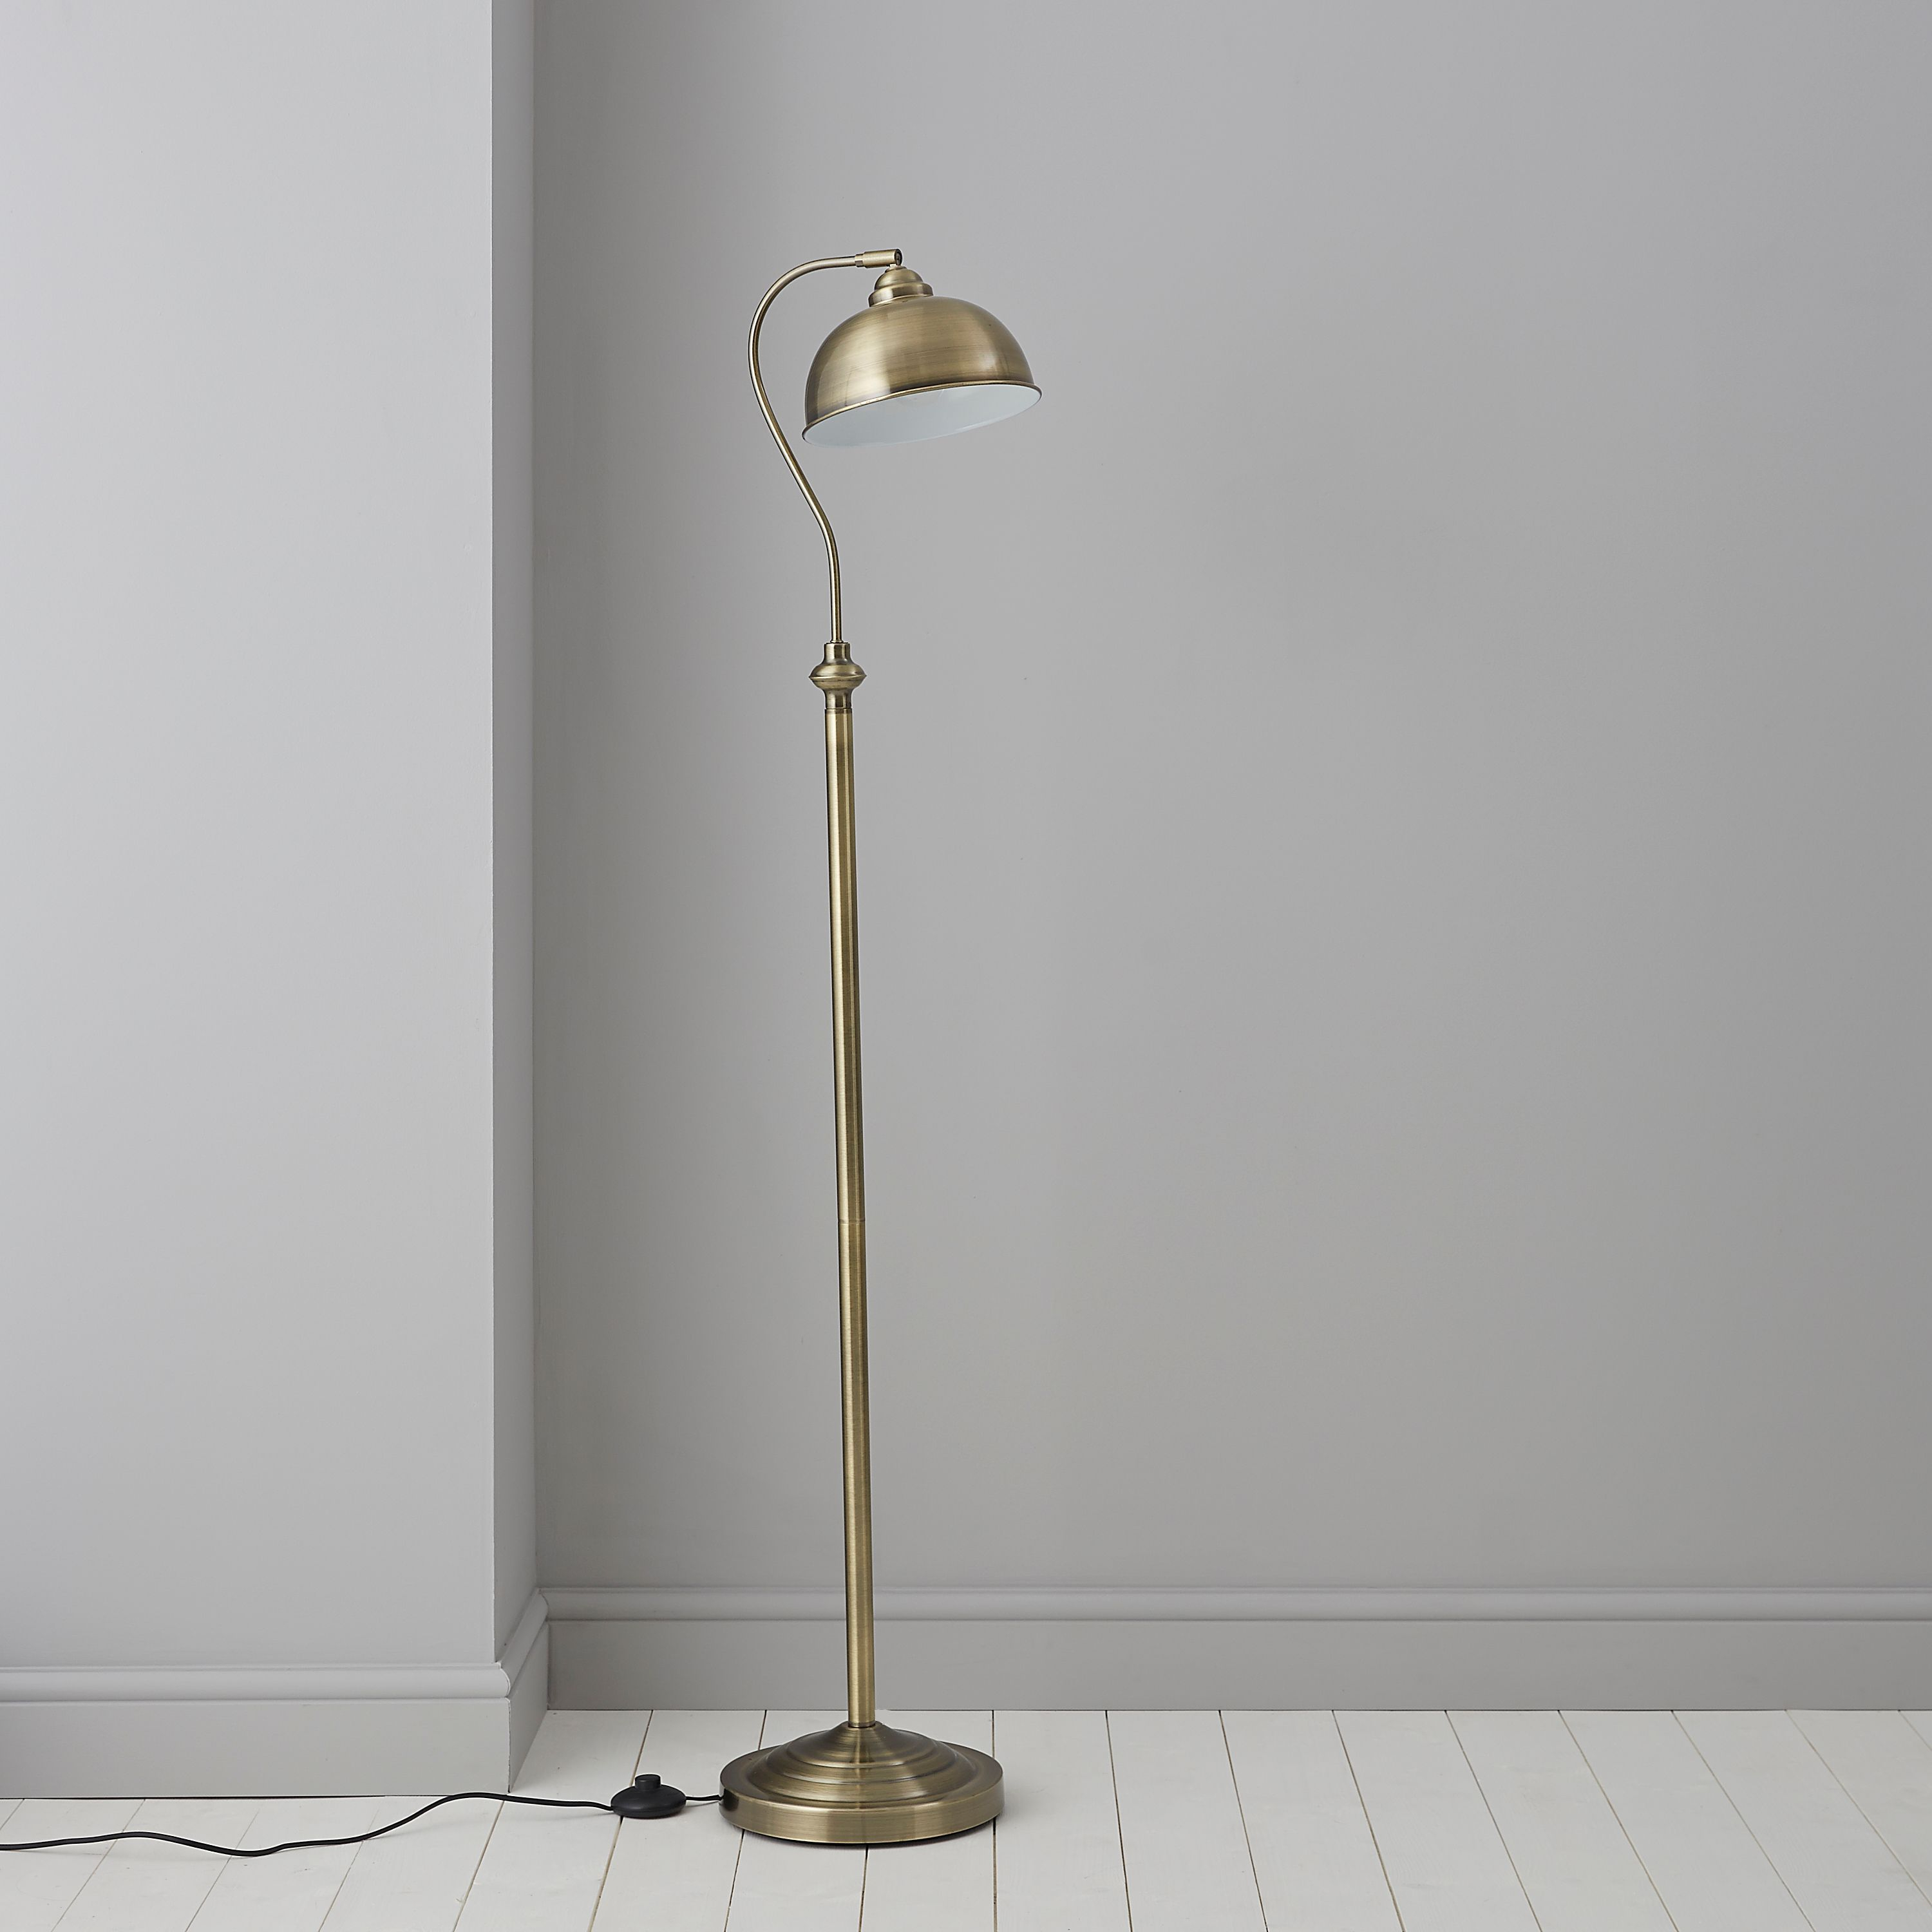 Carswell Gold Floor Lamp Gold Floor Lamp Floor Lamp Diy with sizing 3000 X 3000